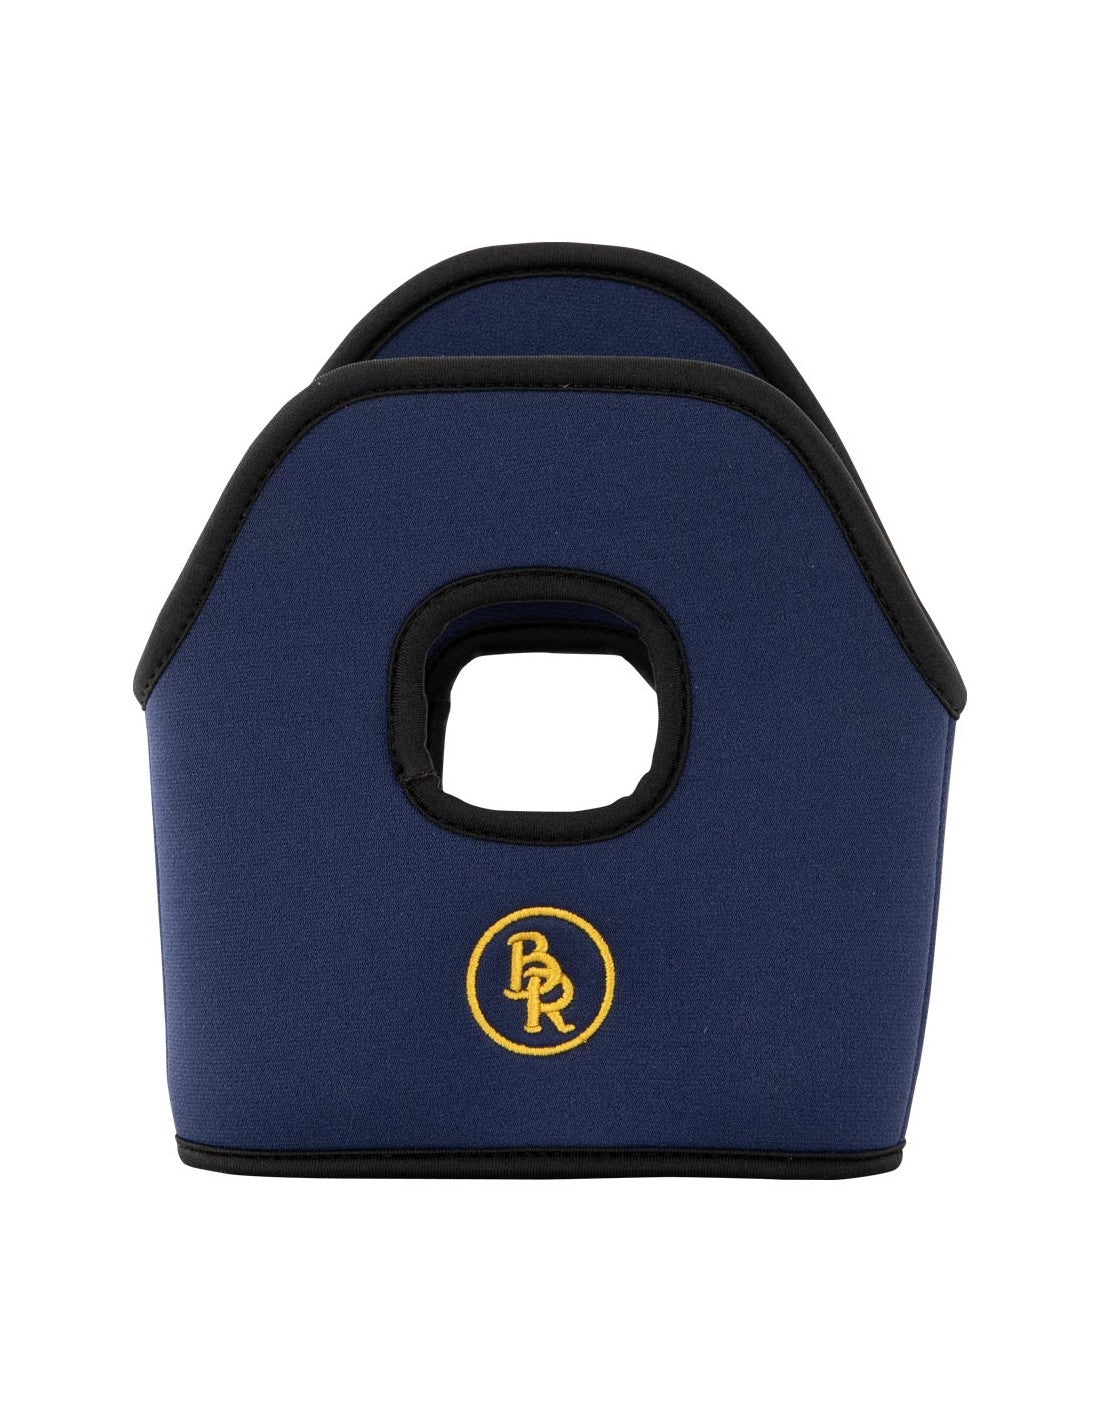 BR Equestrian Stirrup Covers Navy